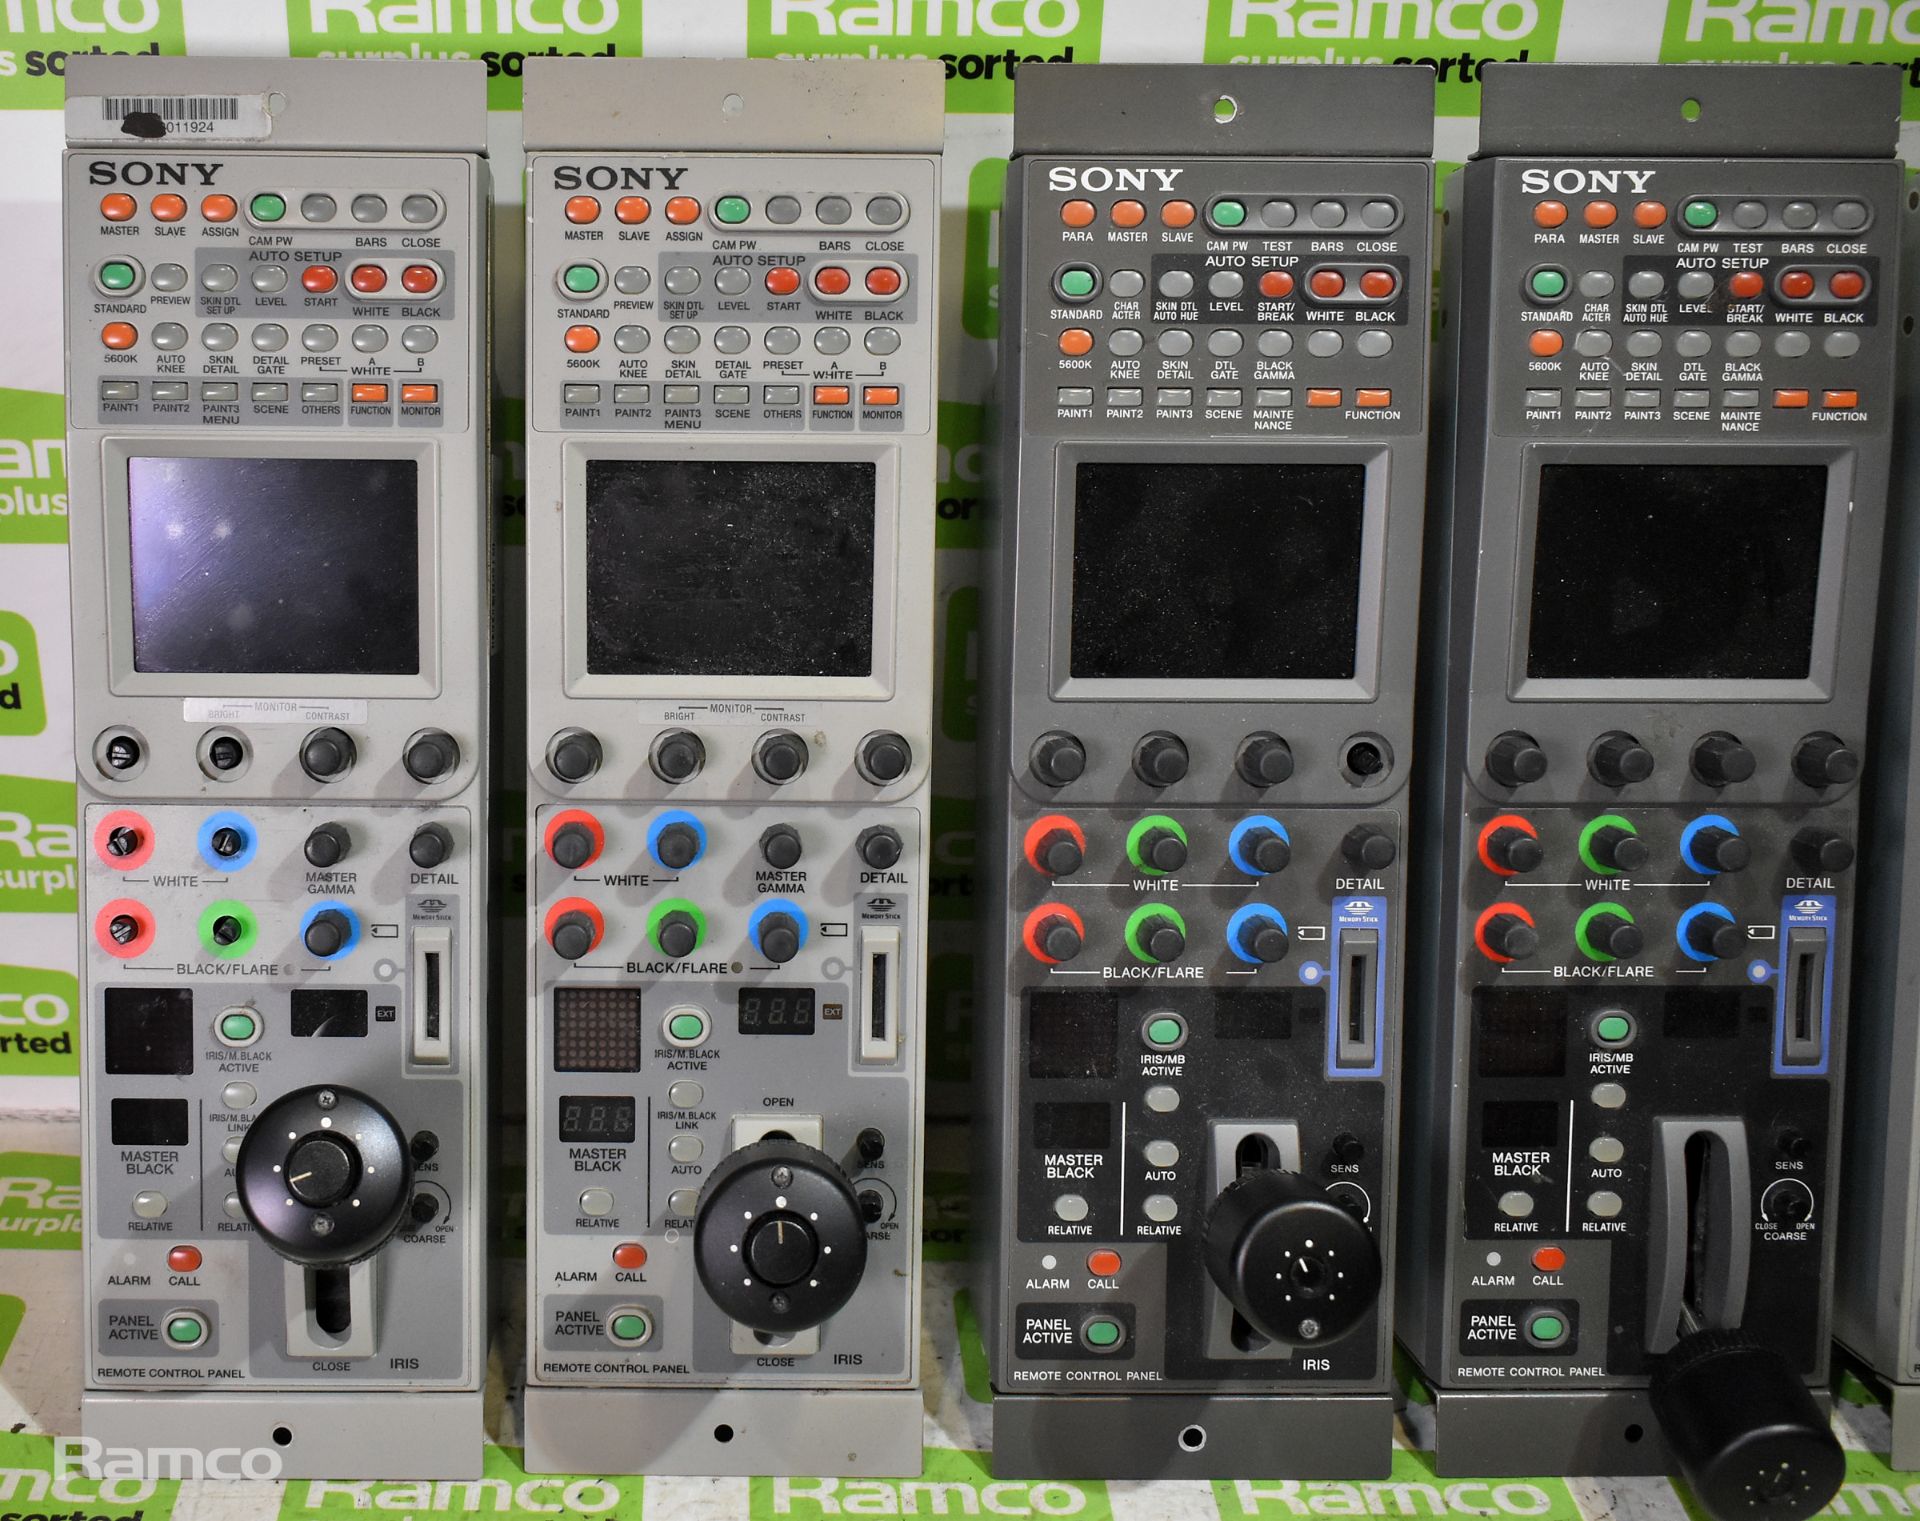 4x Sony RCP-D50 remote control panels, Sony RCP-D51 remote control panel, 2x Sony RCP-750 units - Image 2 of 15